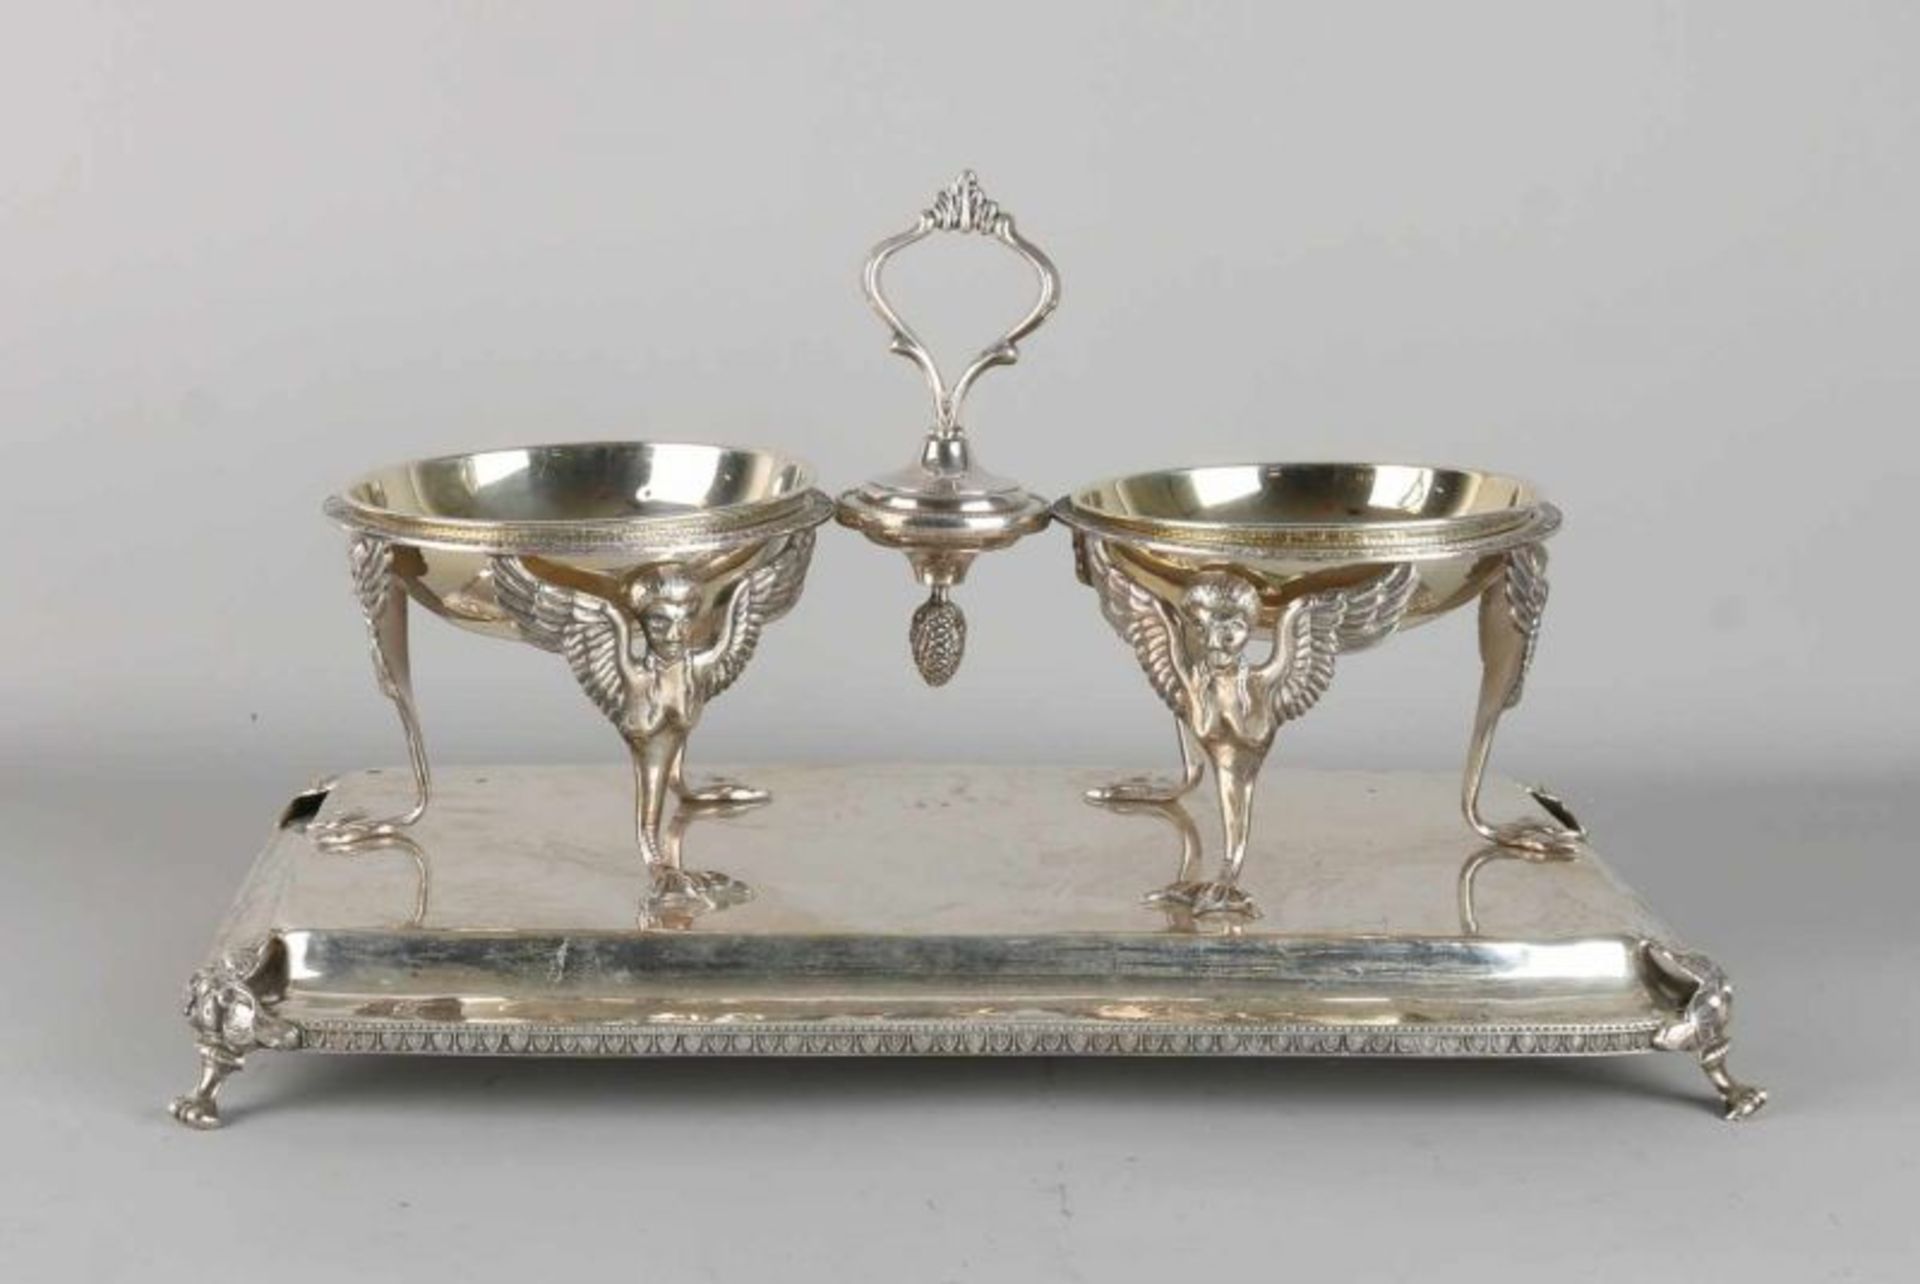 Fine silver table piece, Caviar-scale, 925/000, having a rectangular basement fitted with an edge